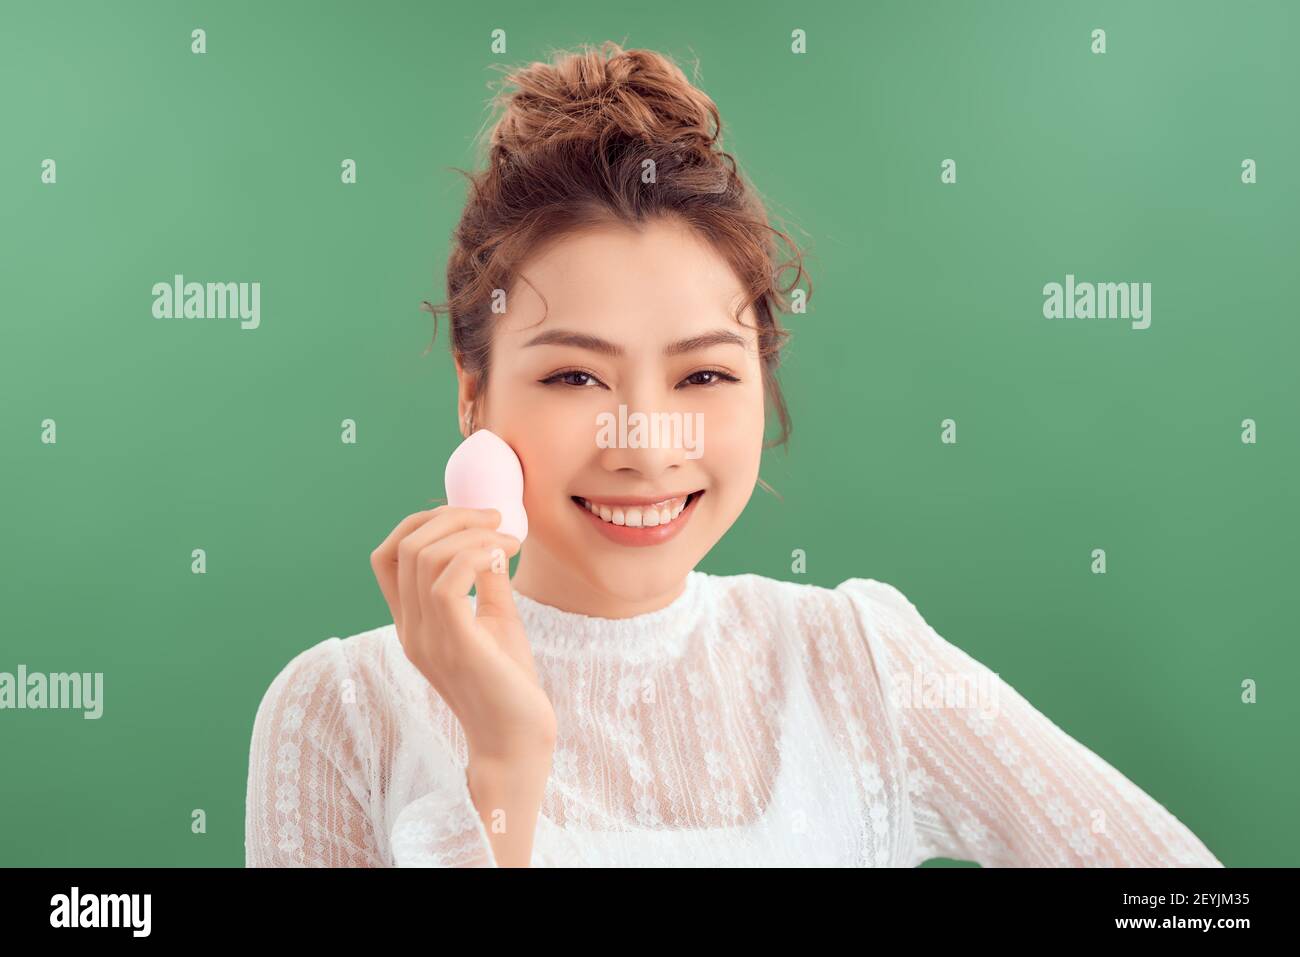 Woman applying foundation using cosmetic sponge, beauty blender. Photo of woman with perfect makeup on green background Stock Photo